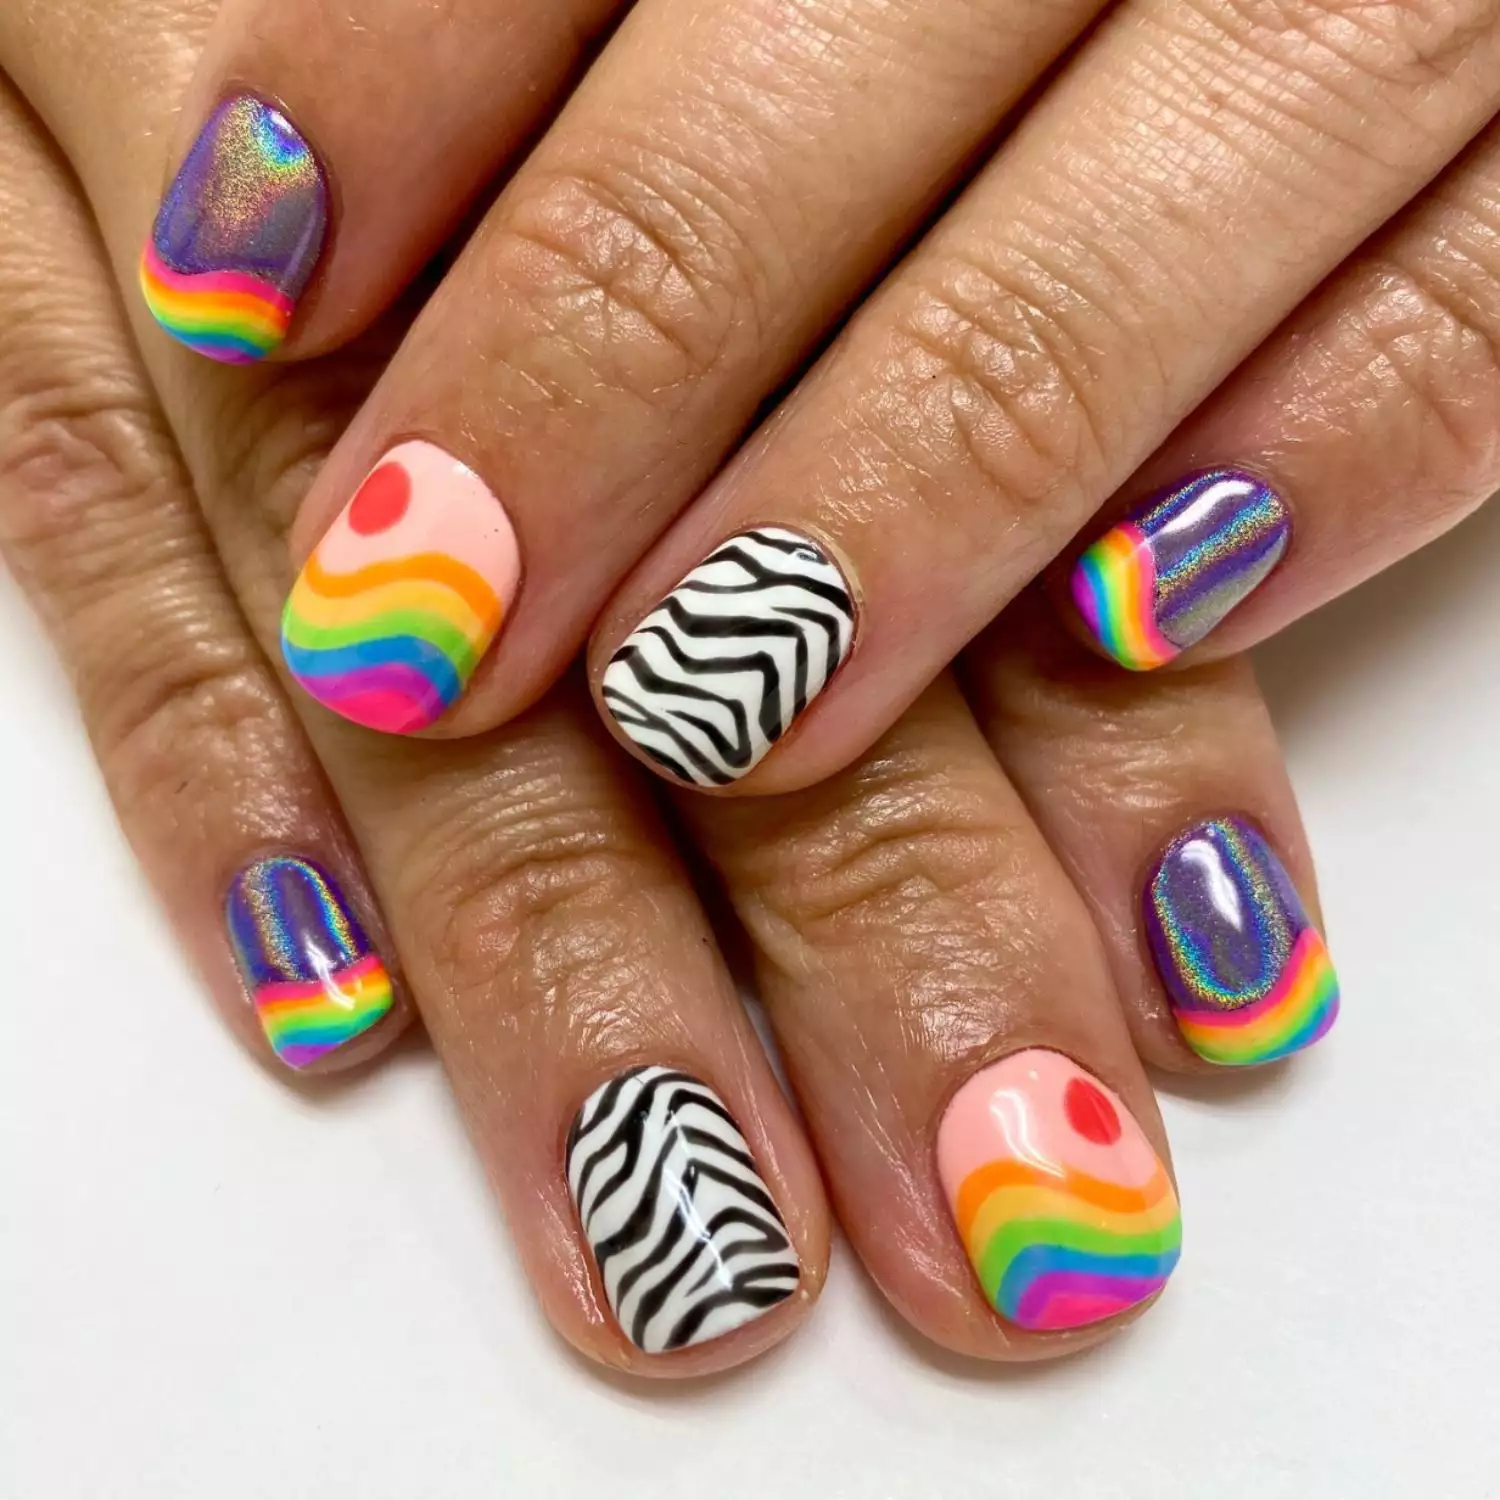 Manicure with rainbow wave designs, neutral and chrome bases, and zebra print accent nails